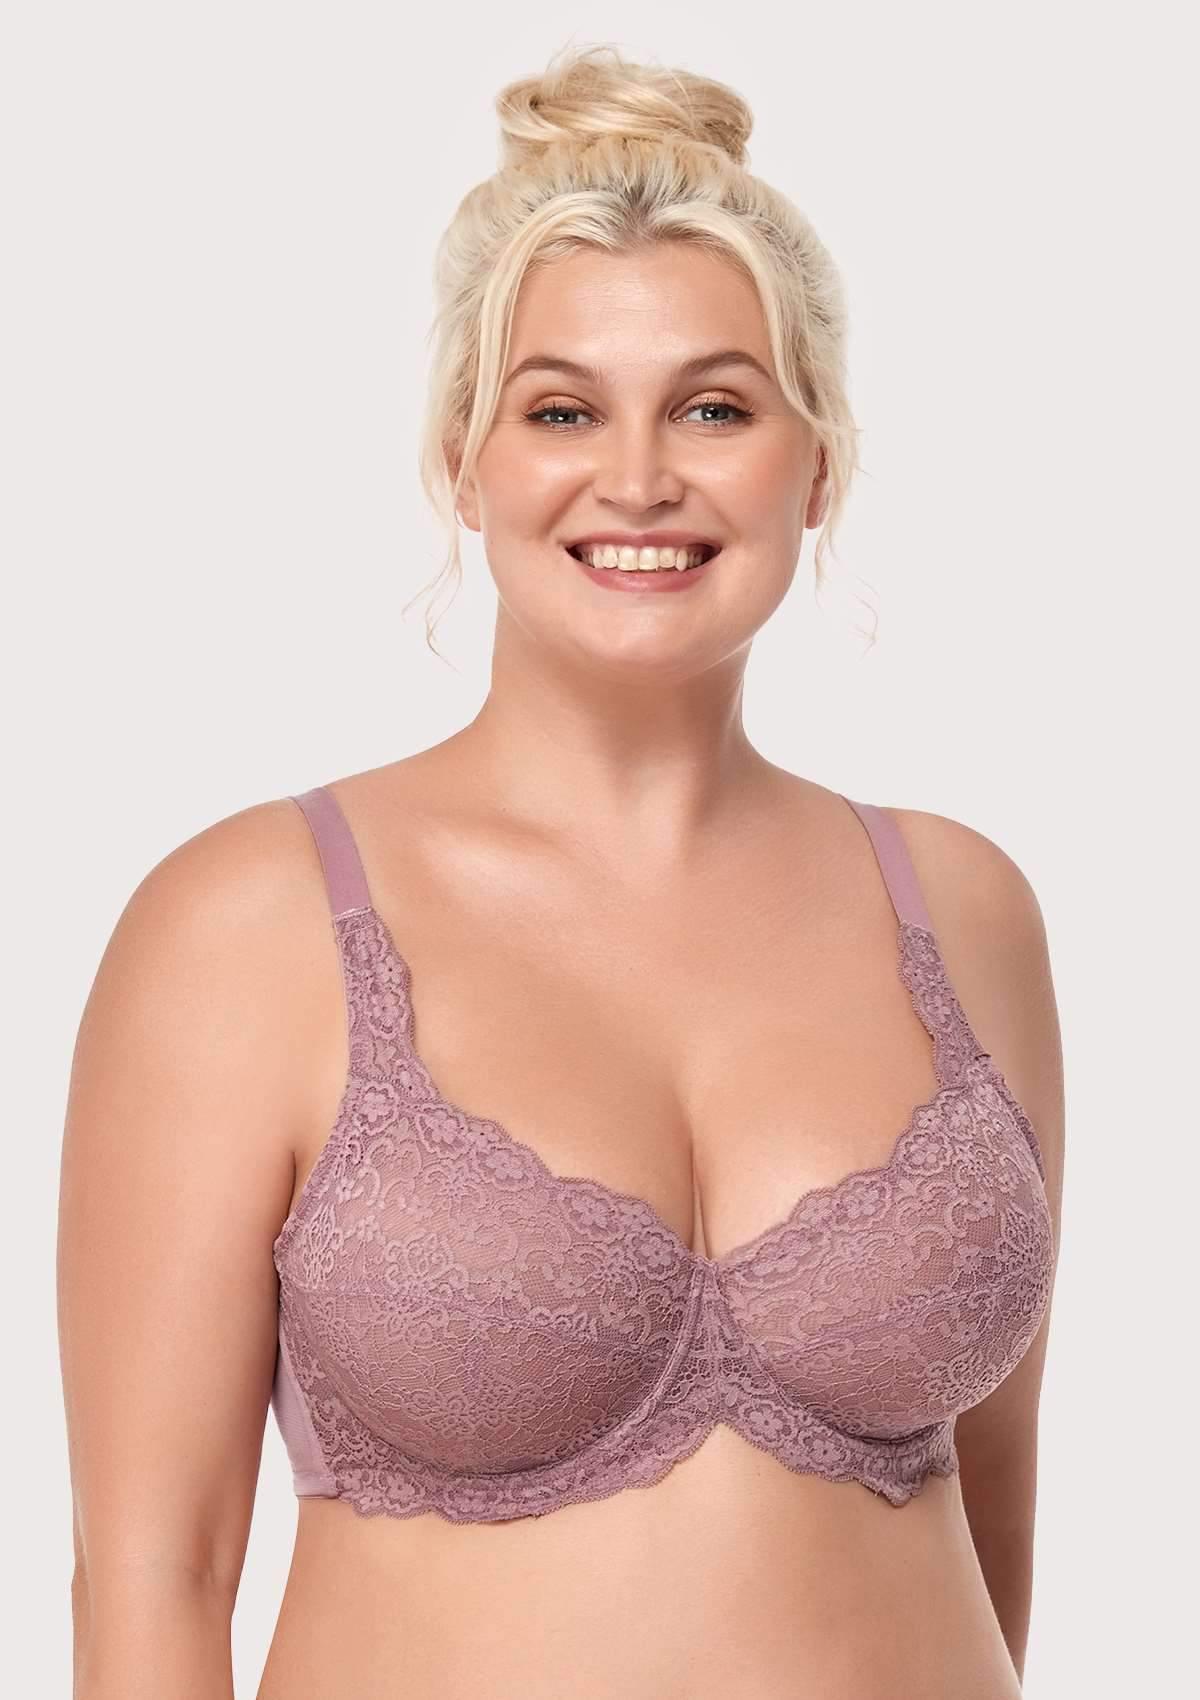 HSIA All-Over Floral Lace Unlined Bra: Minimizer Bra For Heavy Breasts - Purple / 34 / C